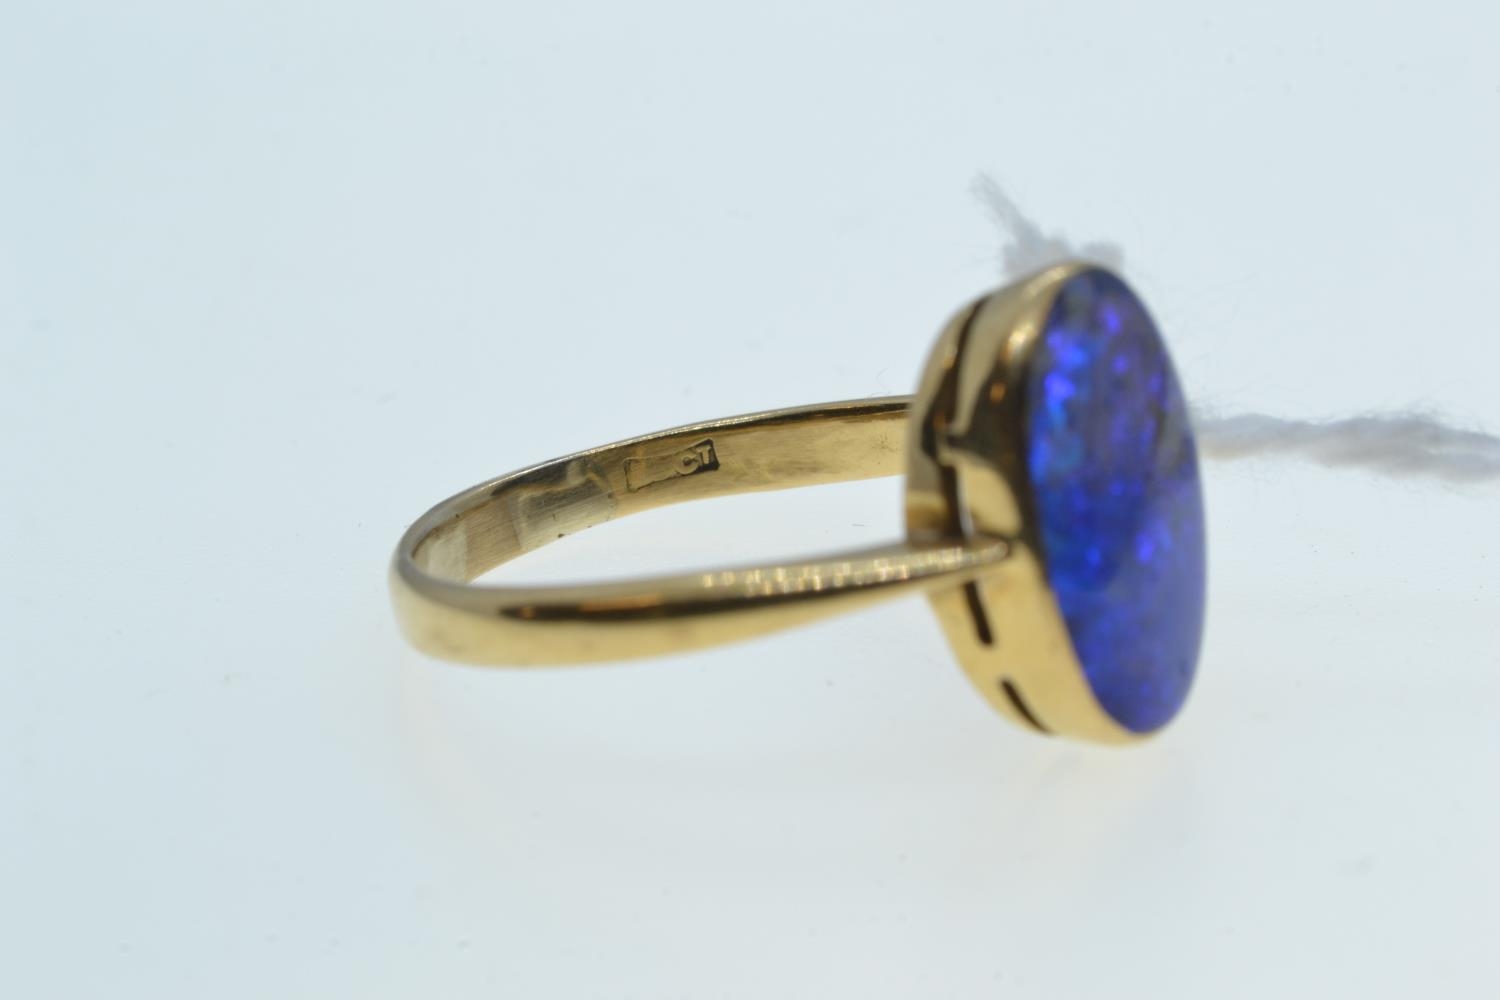 Gold & black opal doublet ring, gold mark rubbed but tests positive for 18ct gold, size Q, 3.73 gram - Image 3 of 3